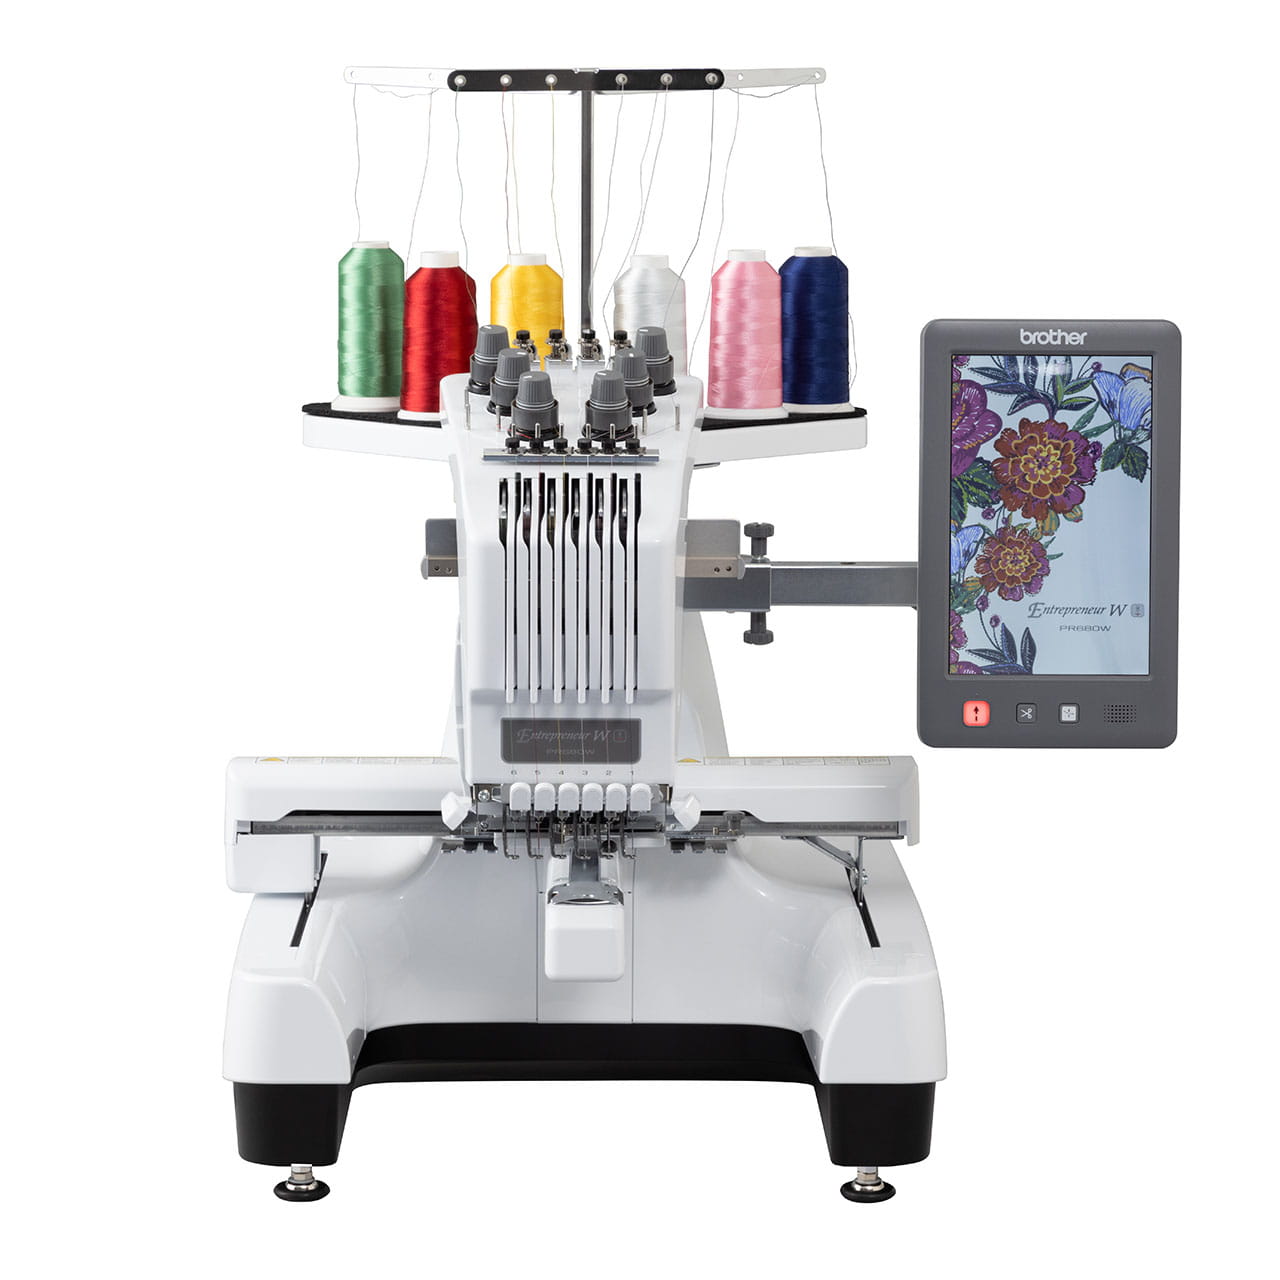 Brother PR680W Embroidery Machine Front View